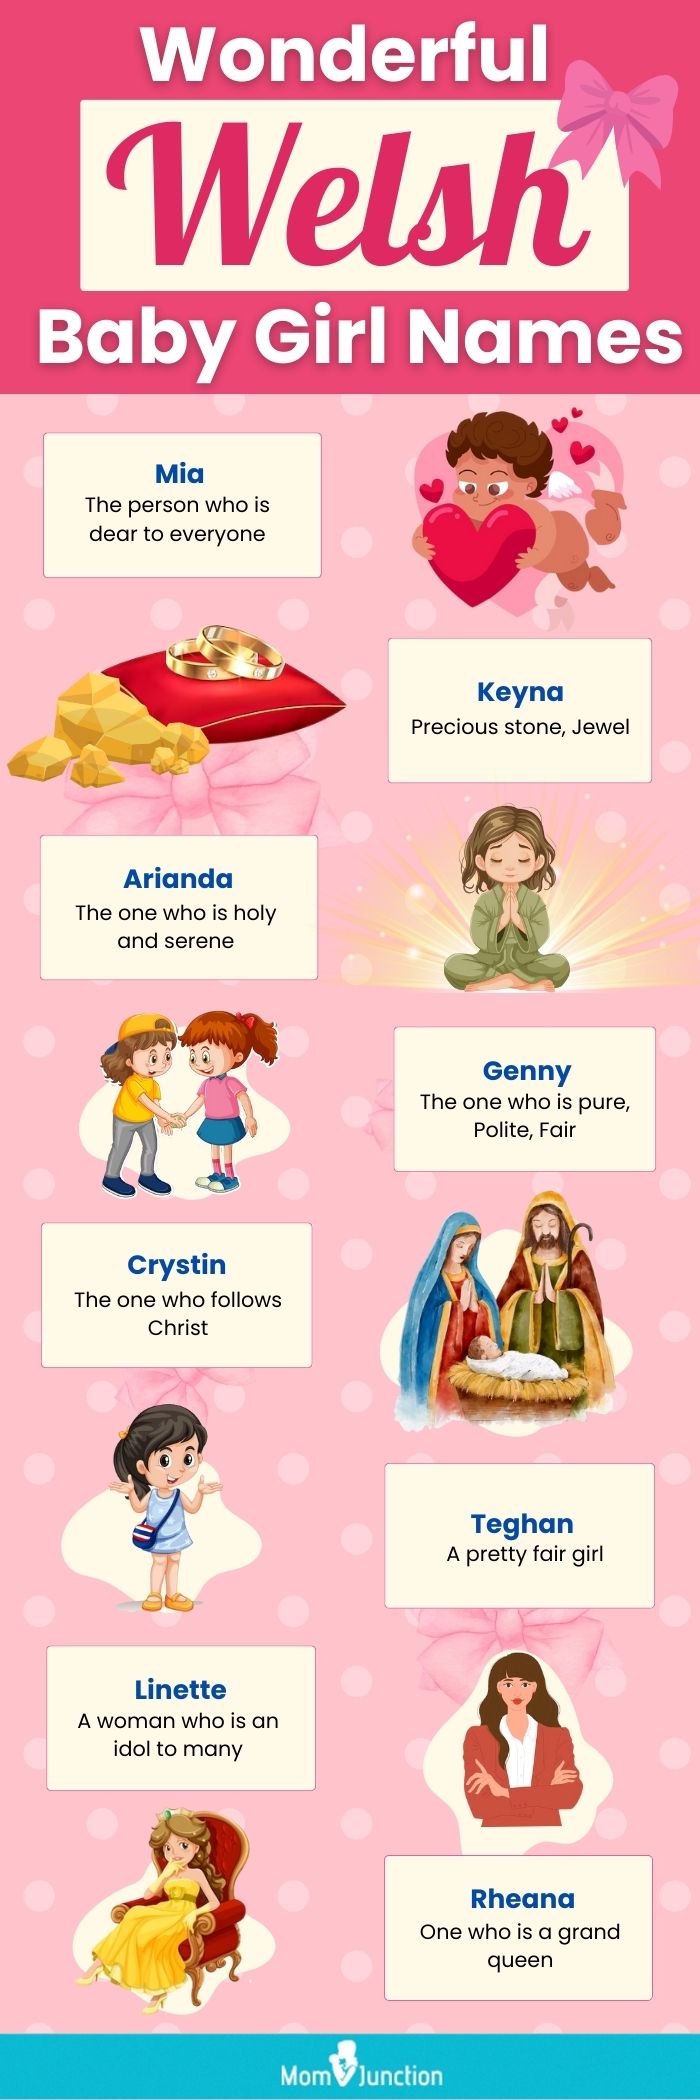 wonderful welsh baby girl names (infographic)